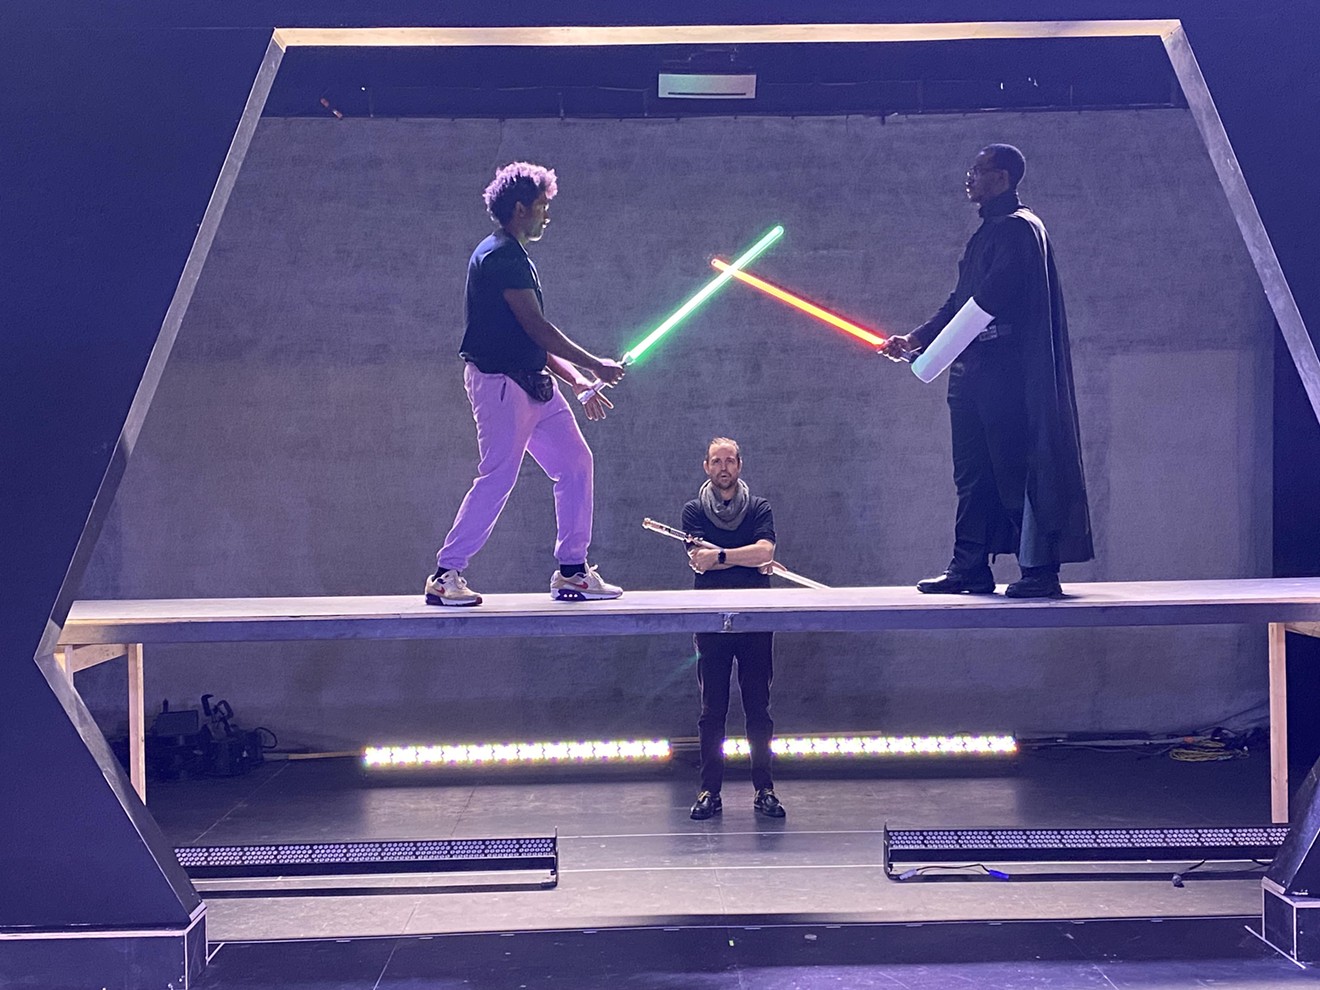 Director Geoffrey Kent oversees a lightsaber fight between Mykail Cooley (left) and Rashad Holland (right).